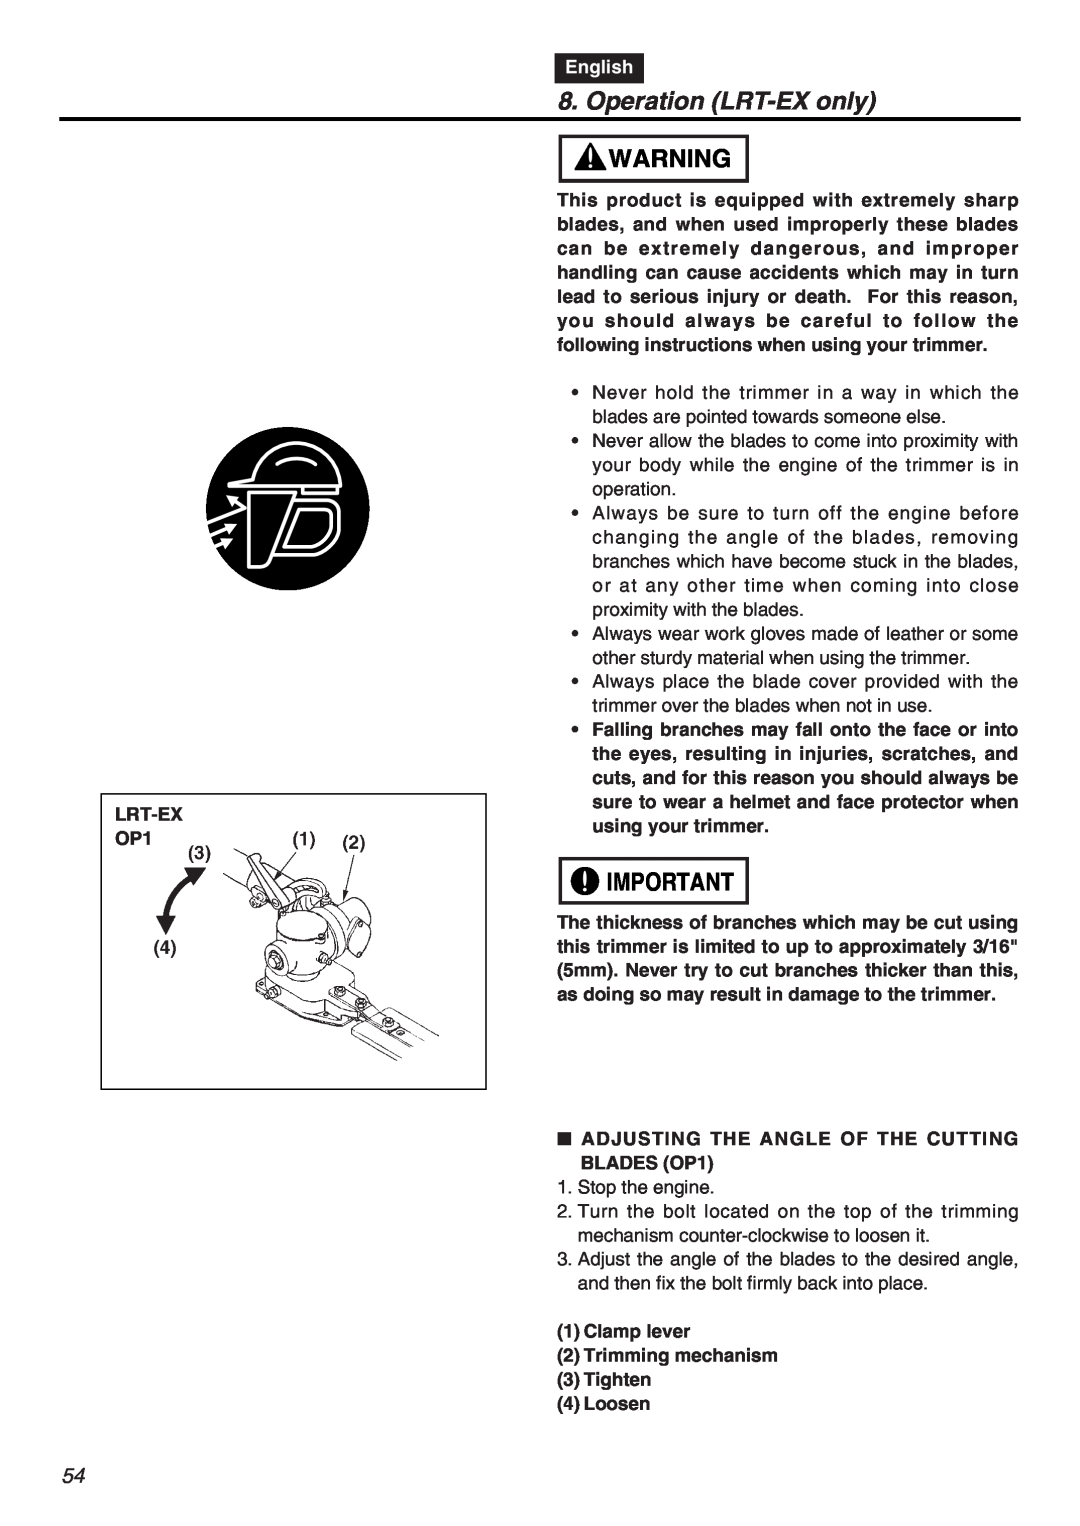 RedMax EXZ2401S-PH-CA manual Operation LRT-EX only, English 